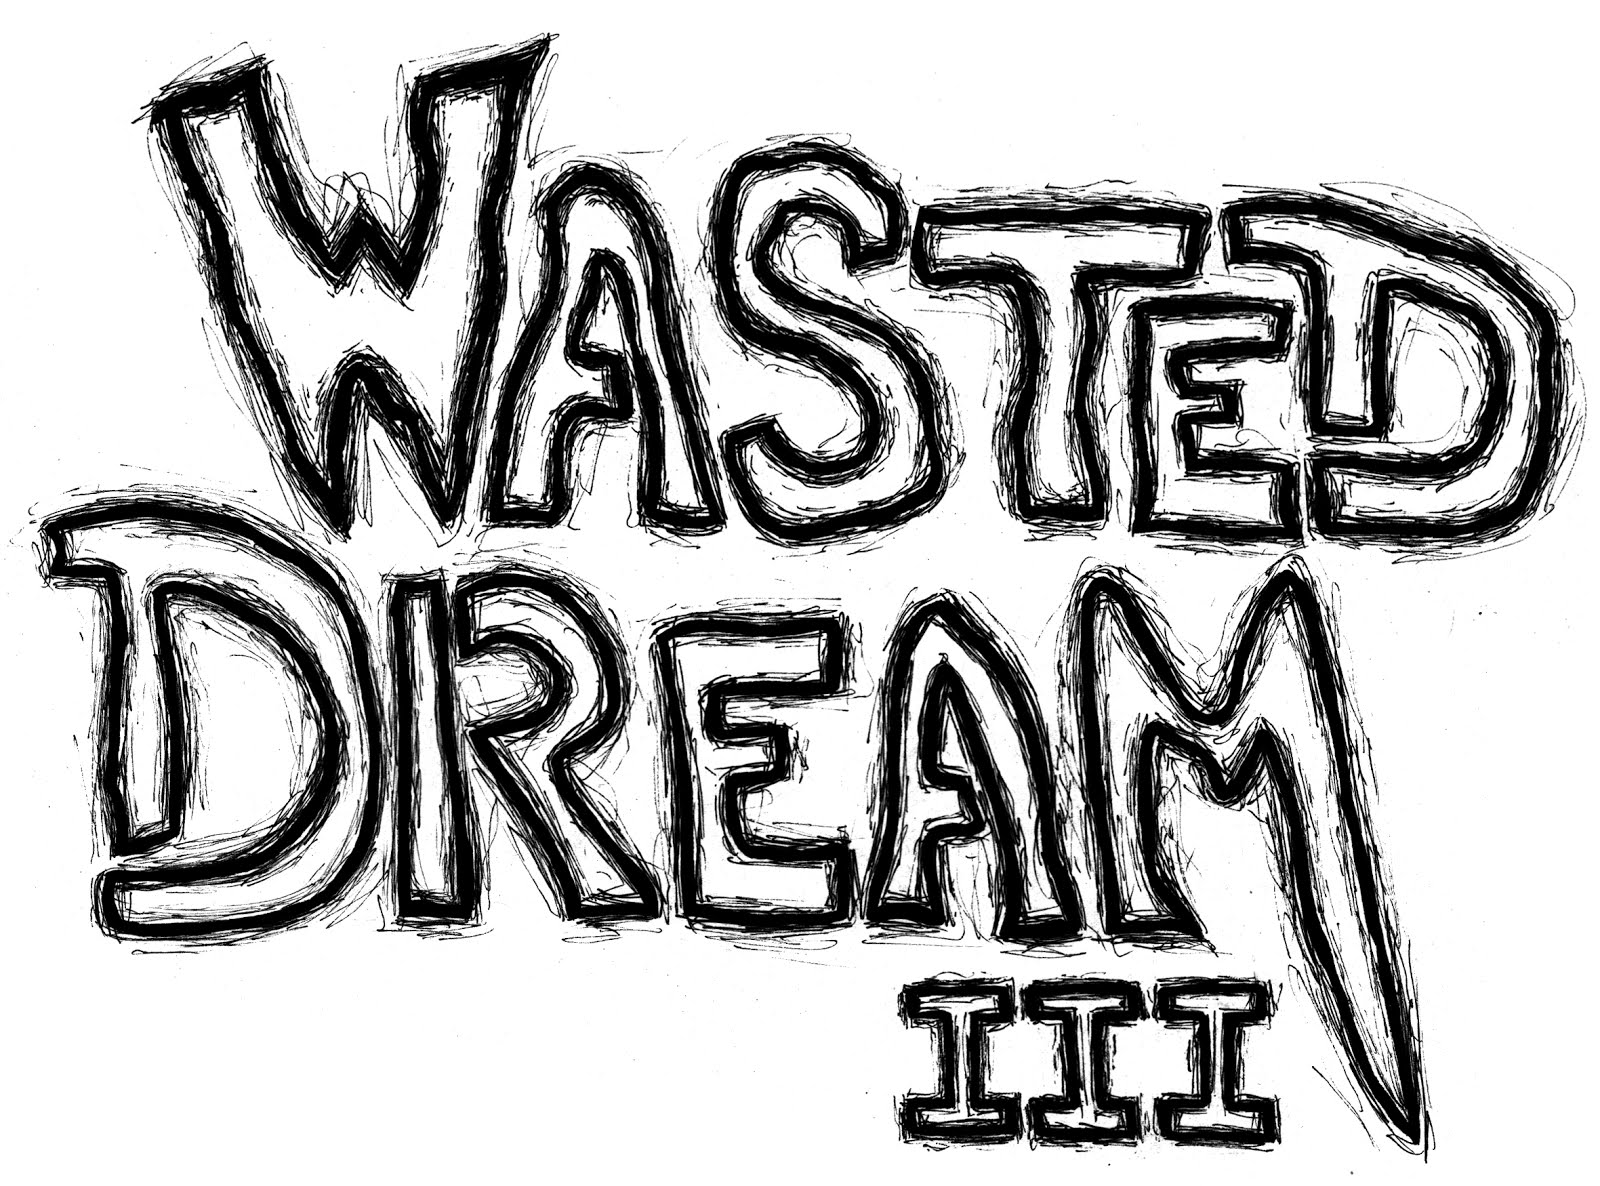 WASTED DREAM